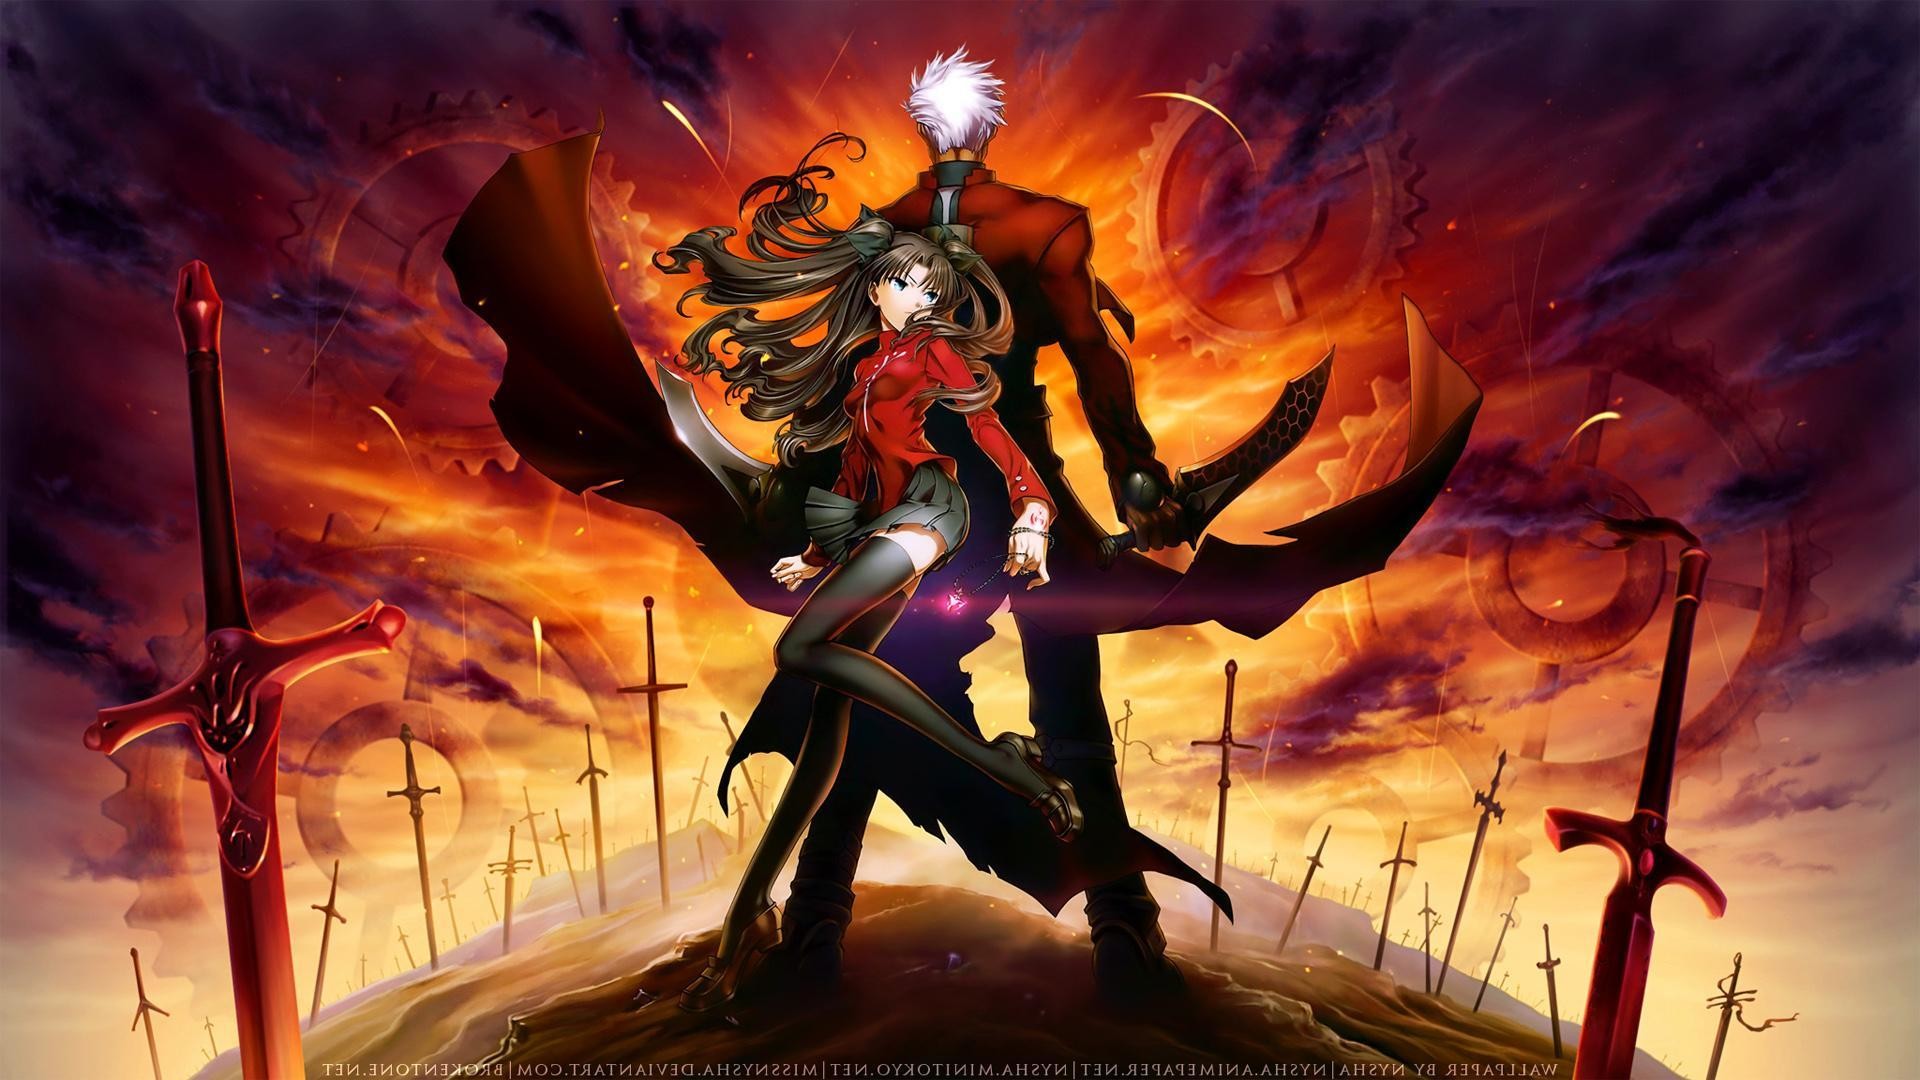 1920x1080 18 HD Fate/stay night: Unlimited Blade Works Desktop Wallpapers For Free  Download